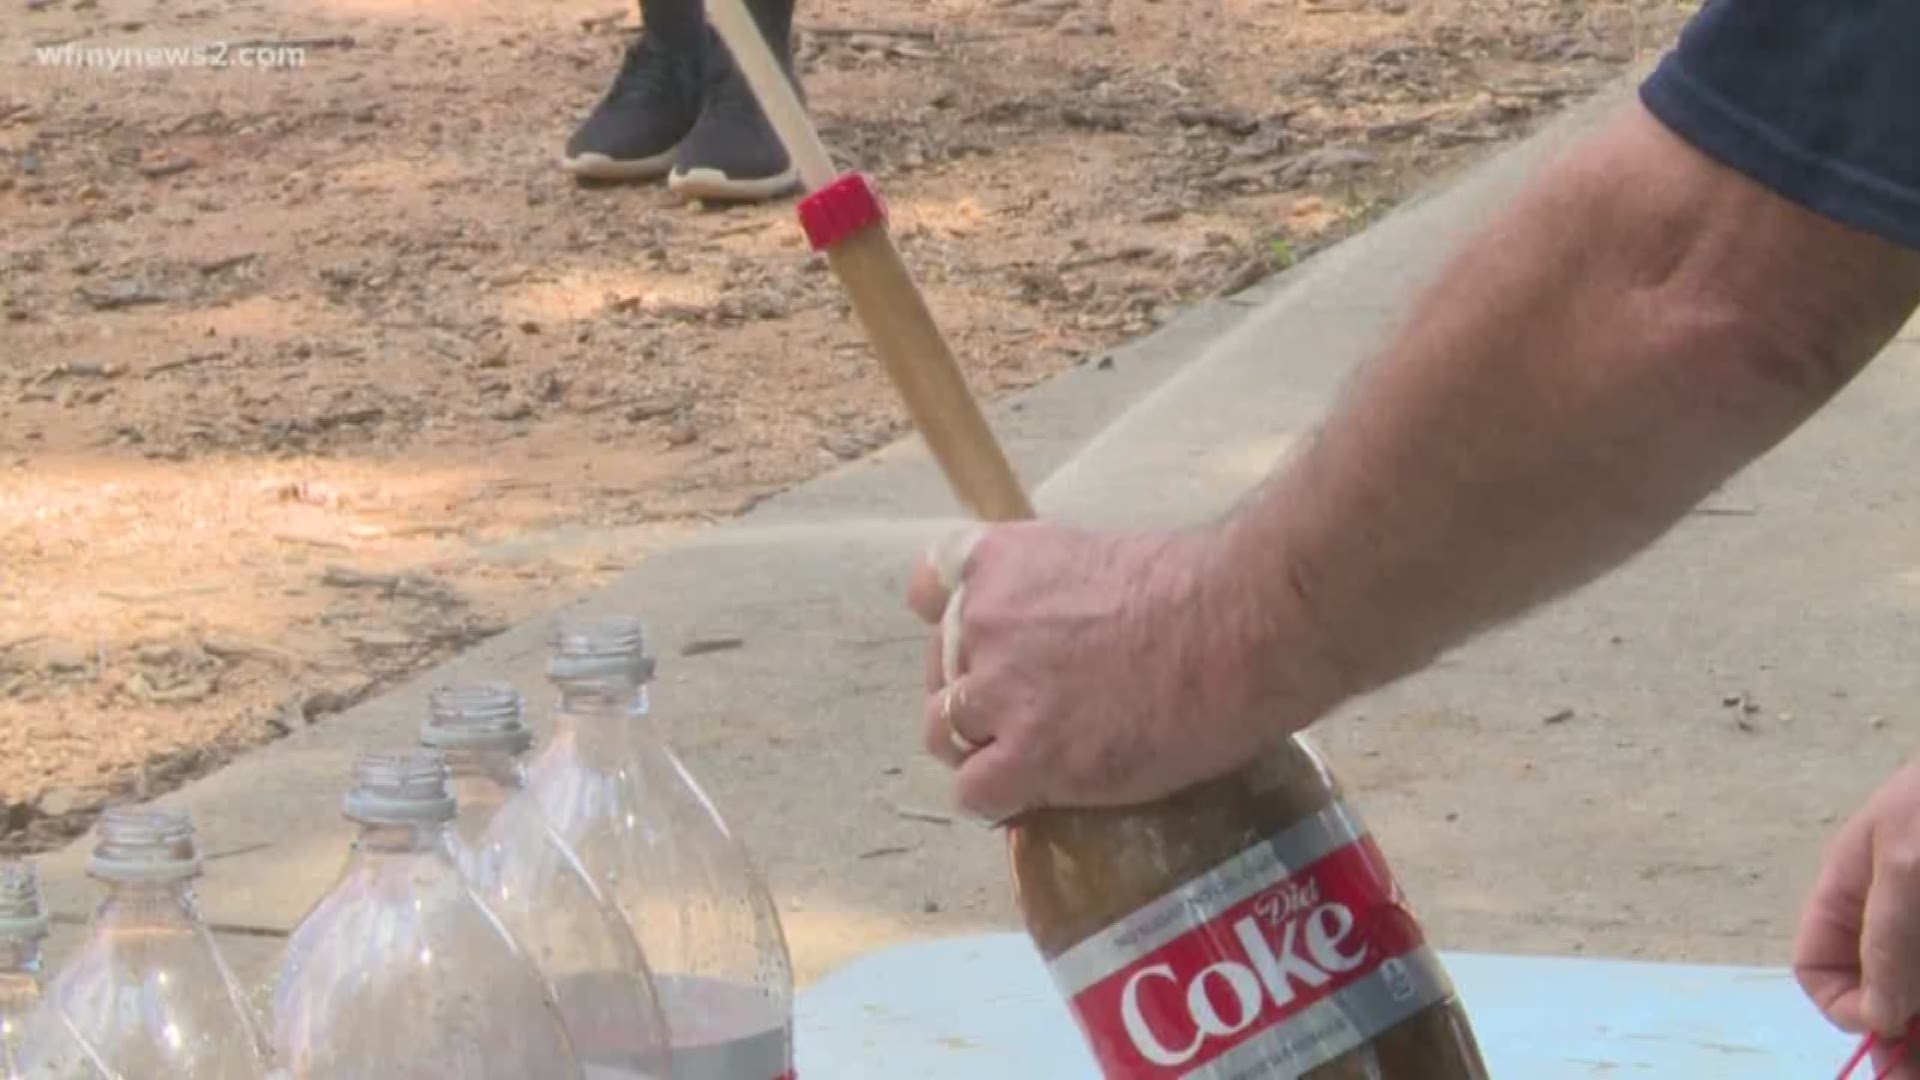 Mentos and Coke Experiment Gone Wrong - wide 4